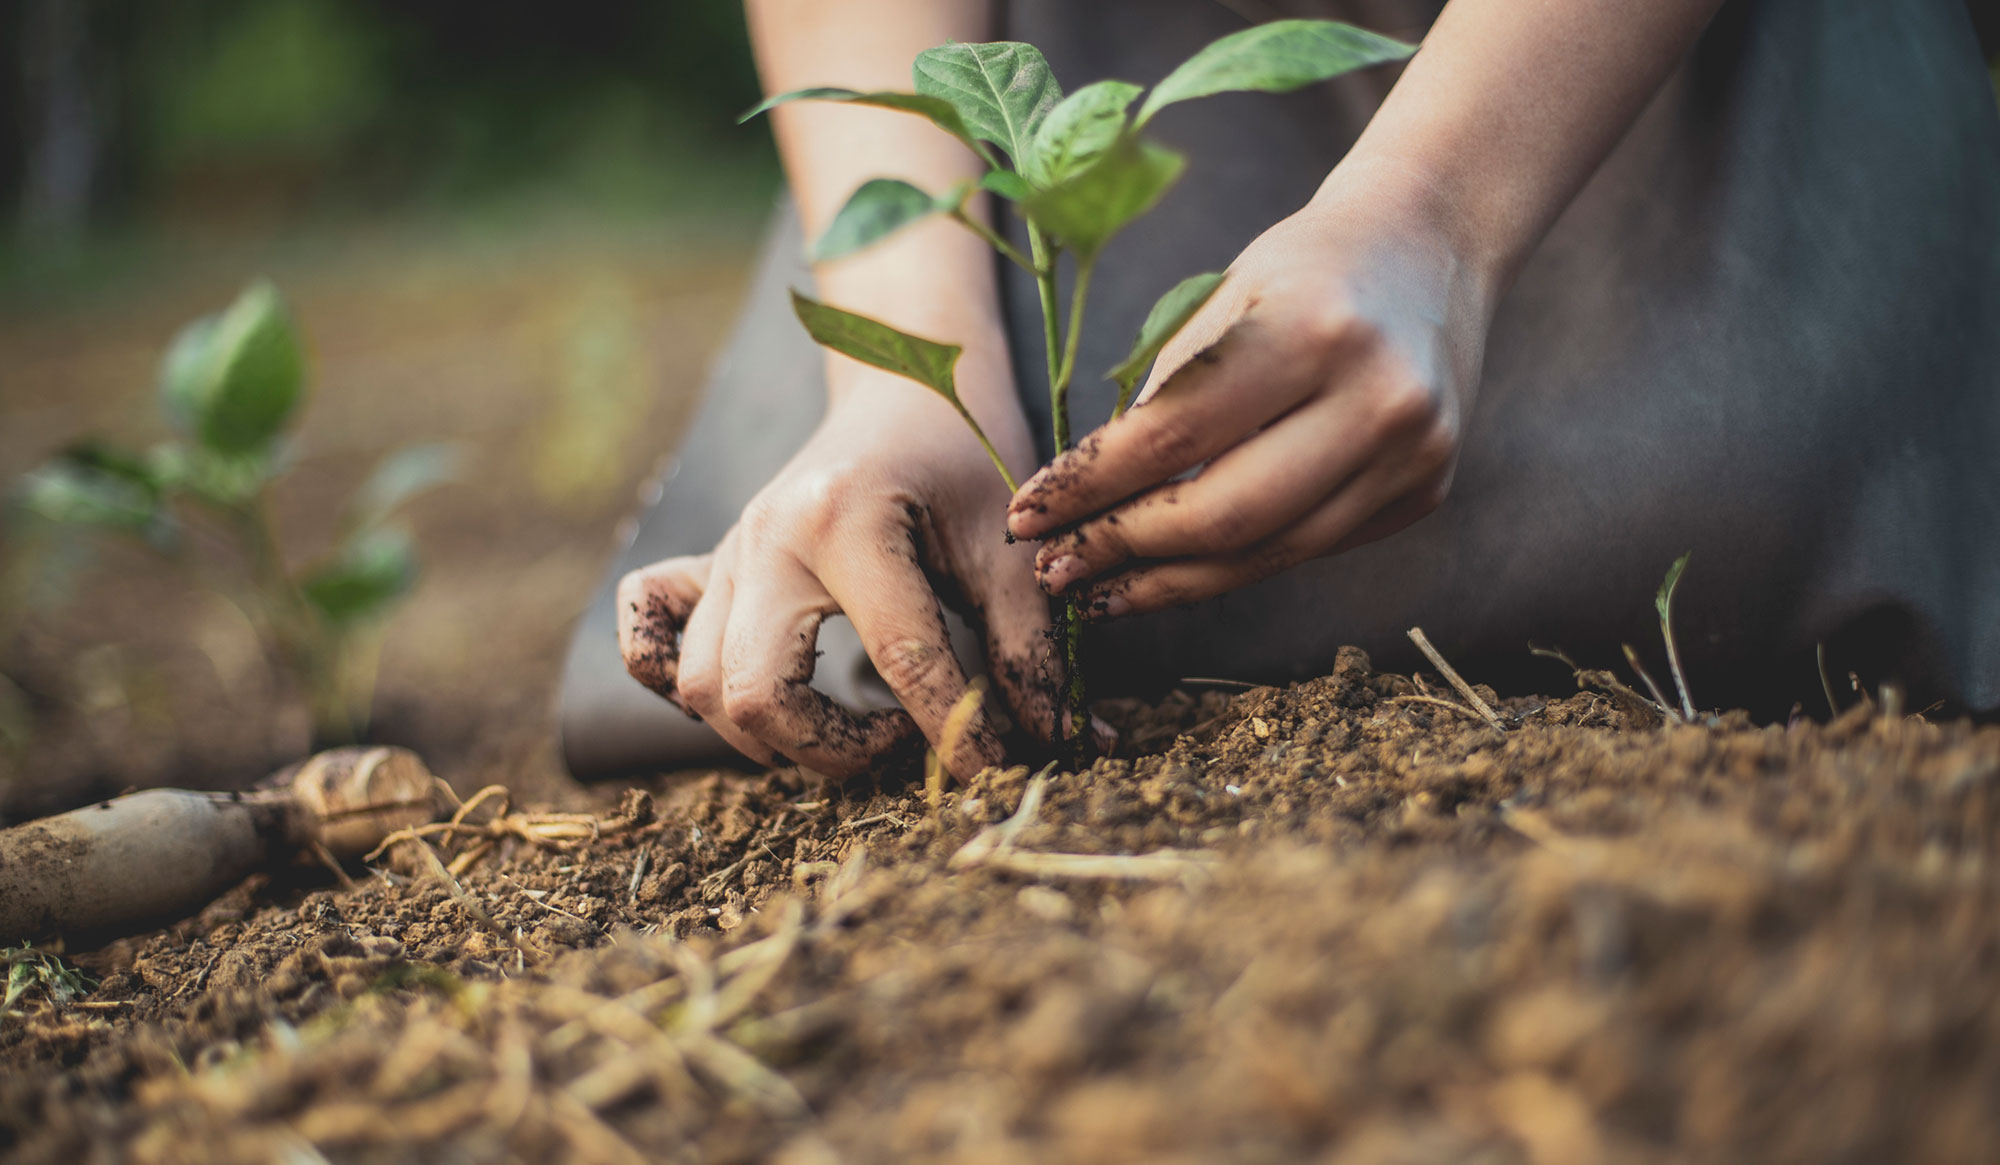 How to Implement Sustainable Gardening Practices